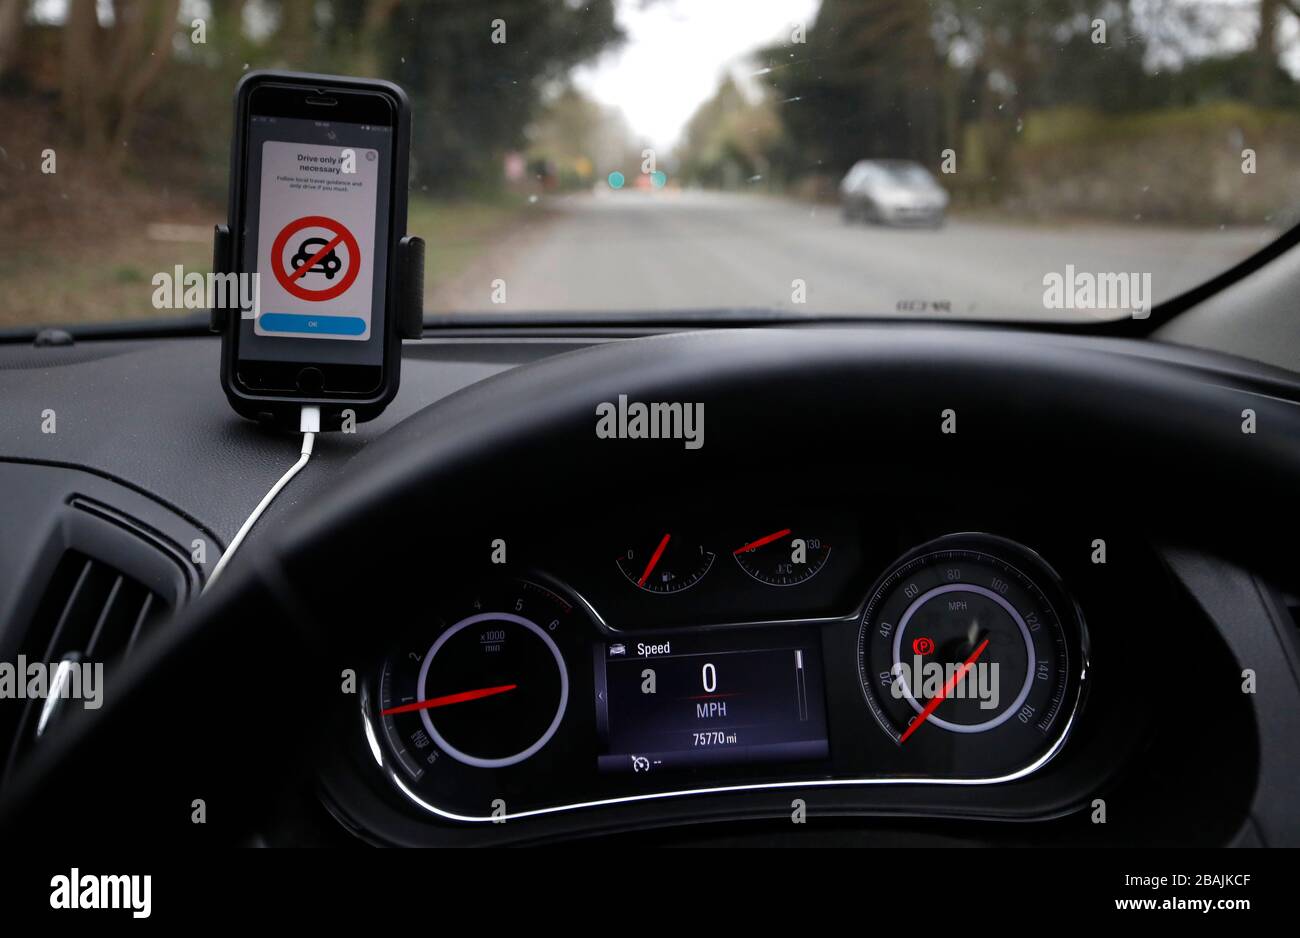 Waze the mobile phone sat-nav system displays a warning to only 'Drive only if necessary' as the UK continues in lockdown to help curb the spread of the coronavirus. Stock Photo